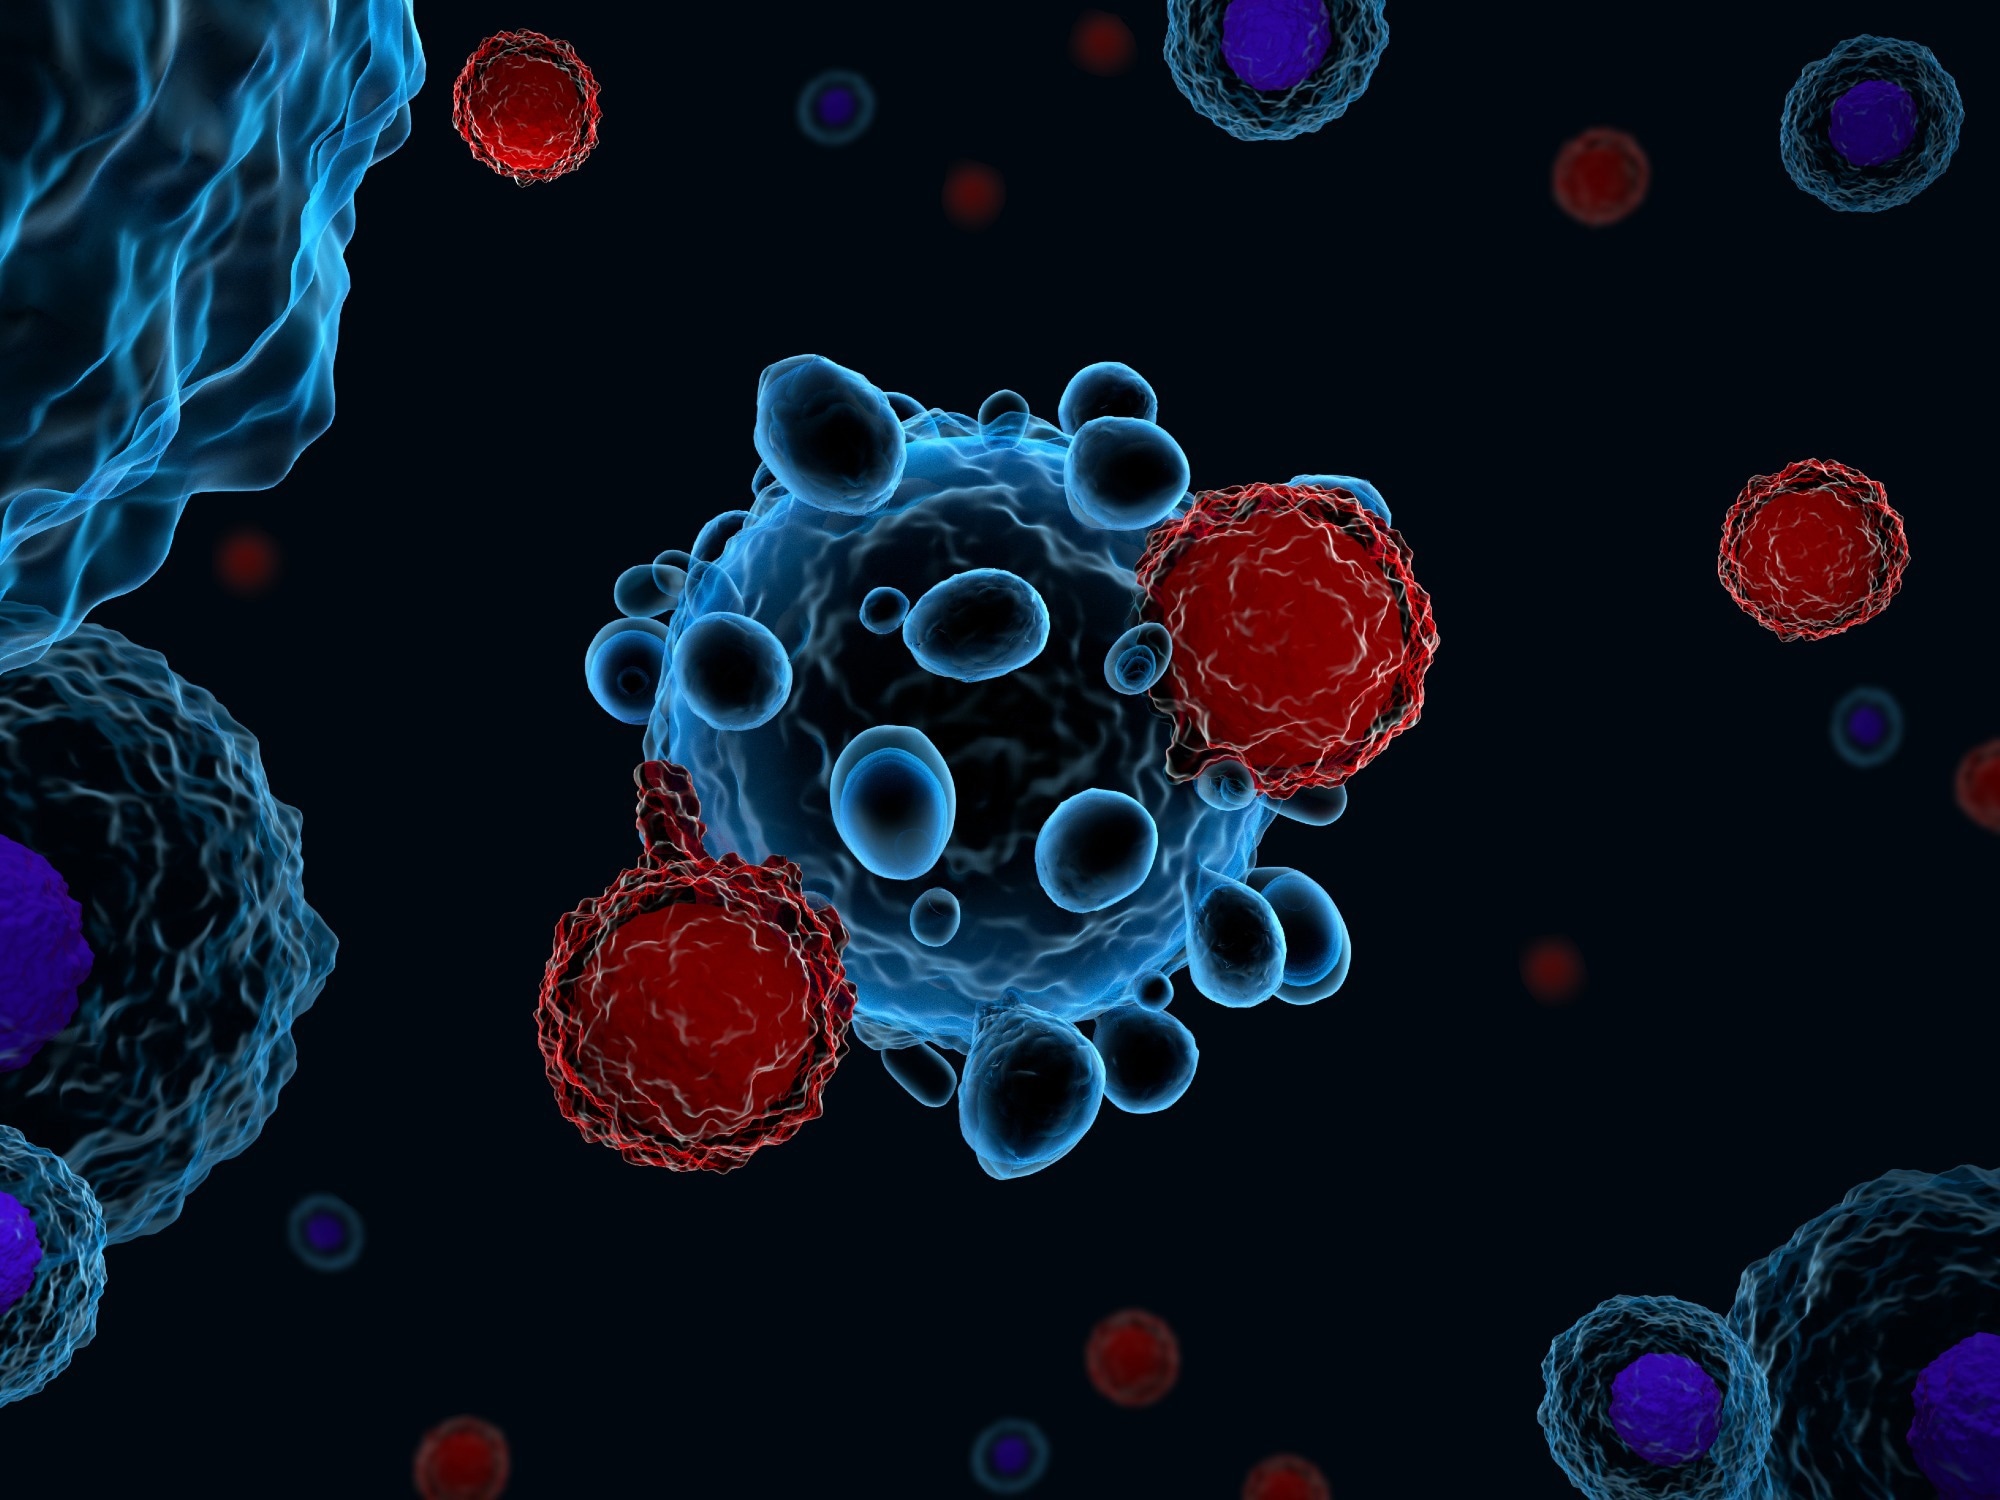 Study: Rapid recall and de novo T cell responses during SARS-CoV-2 breakthrough infection. Image Credit: Meletios Verras/Shutterstock